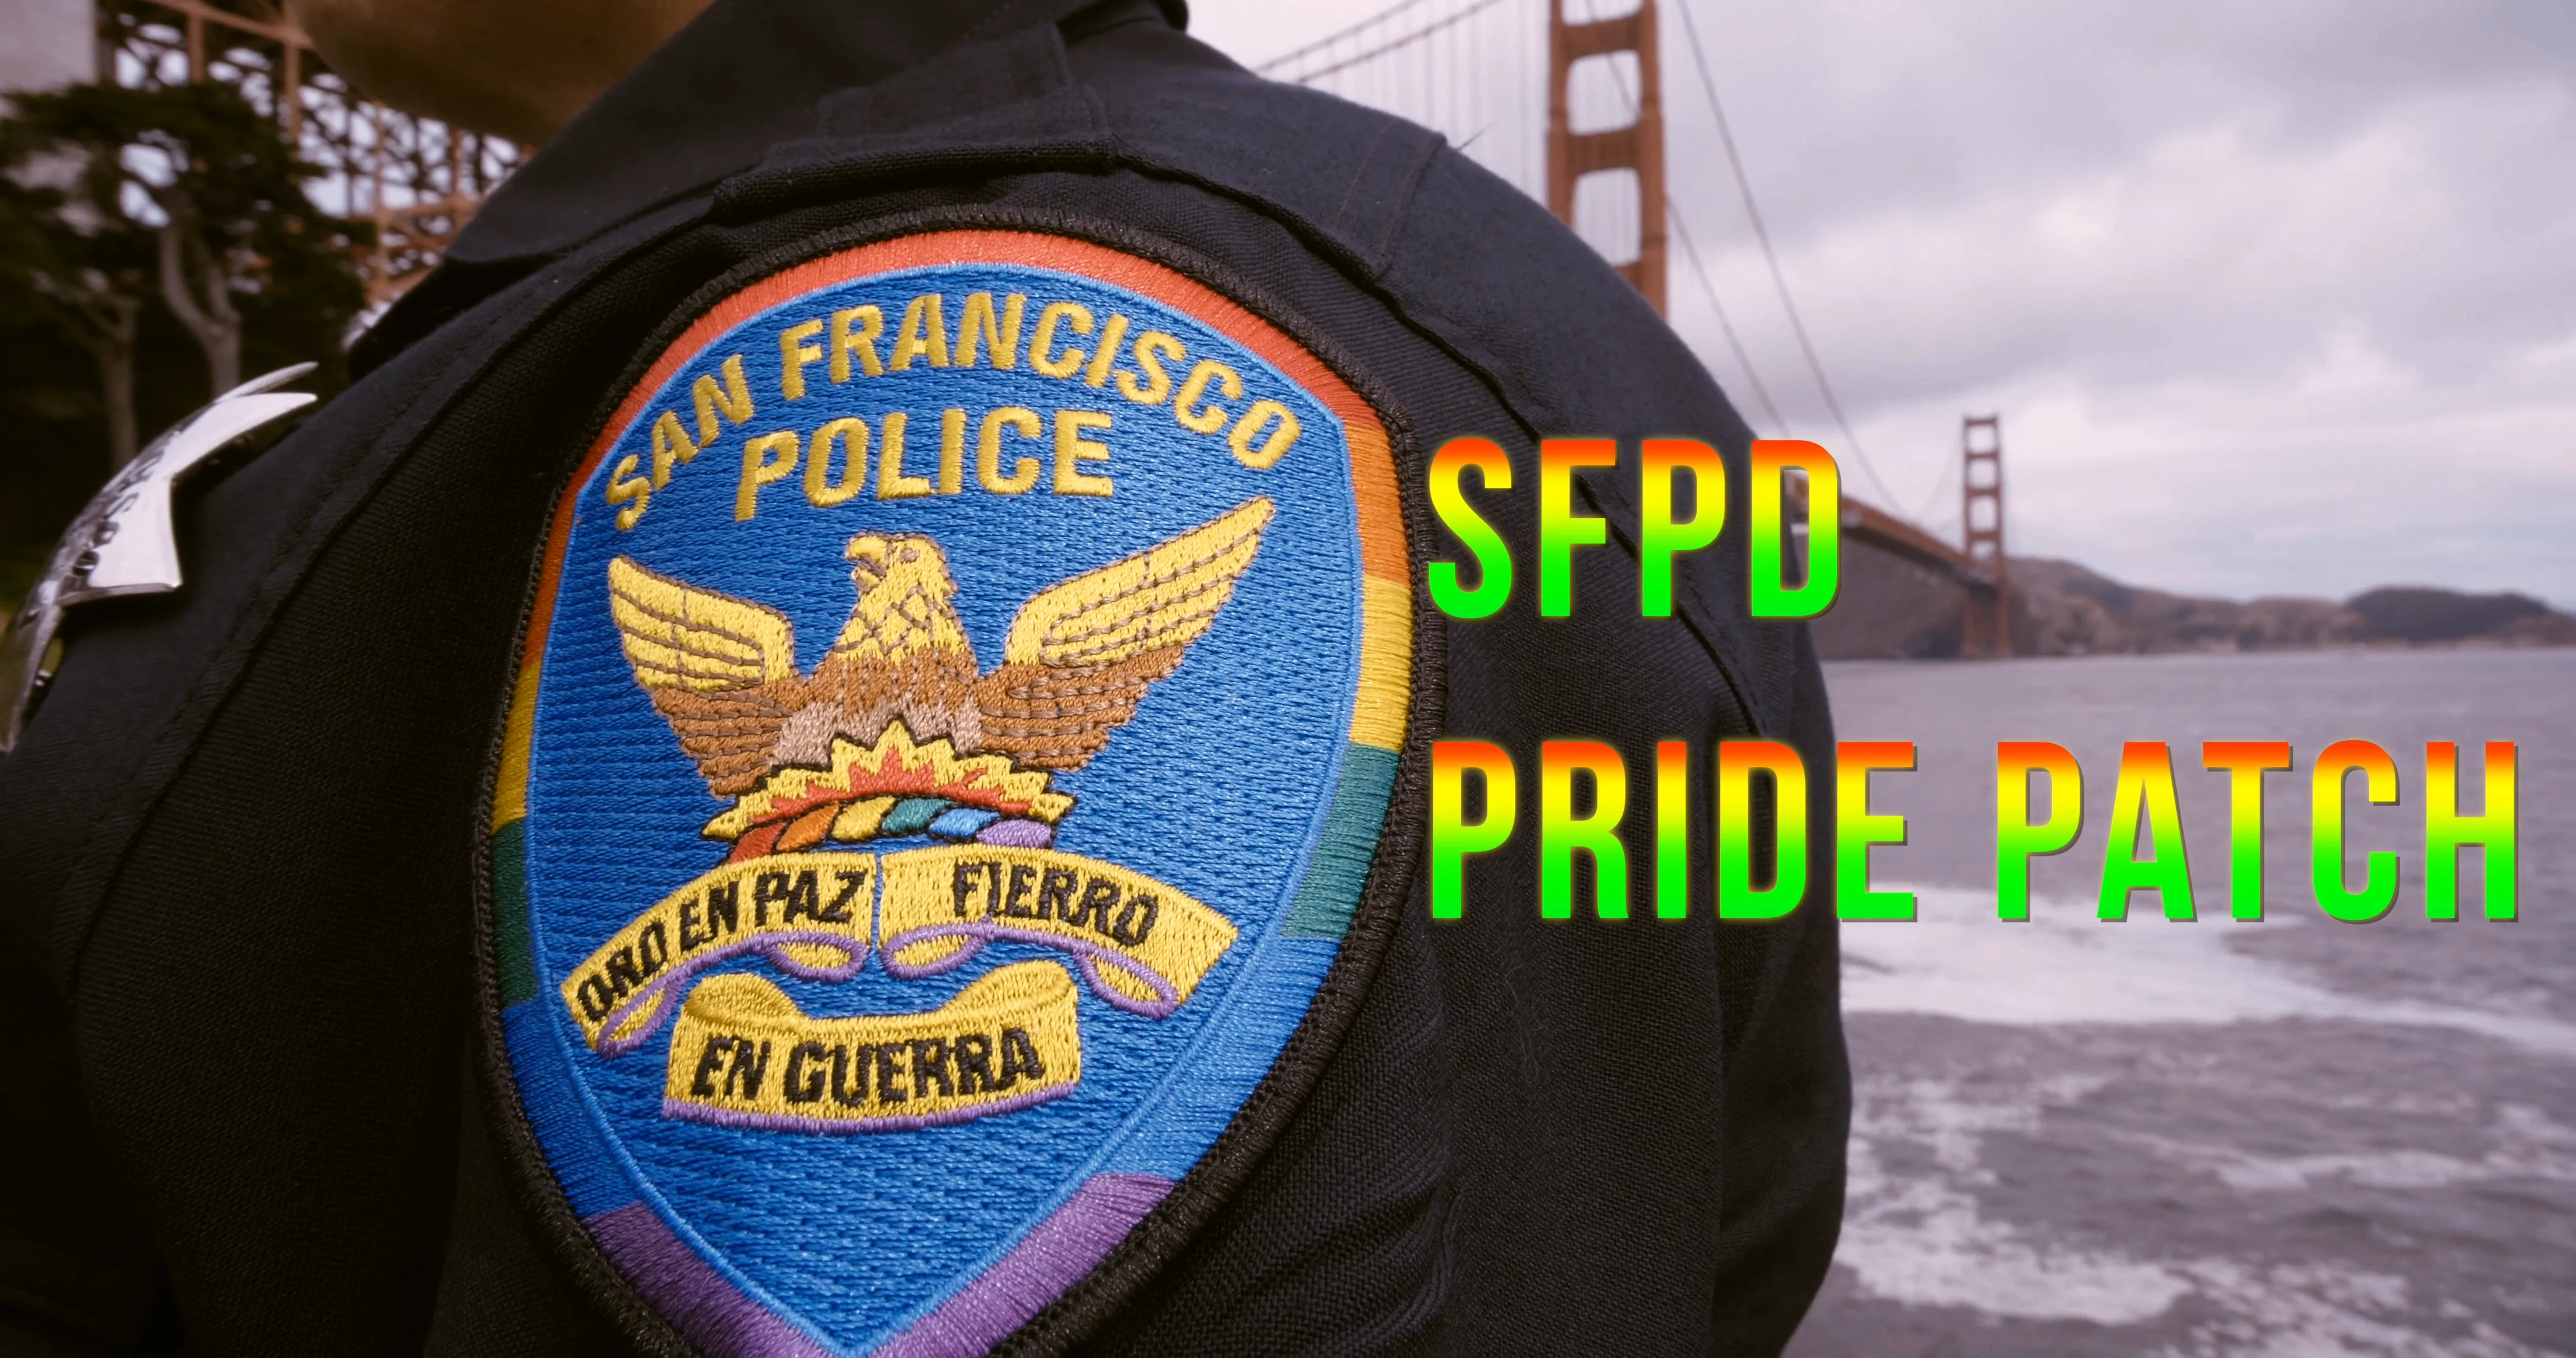 SFPD Pride Patch Project 19-072  San Francisco Police Department